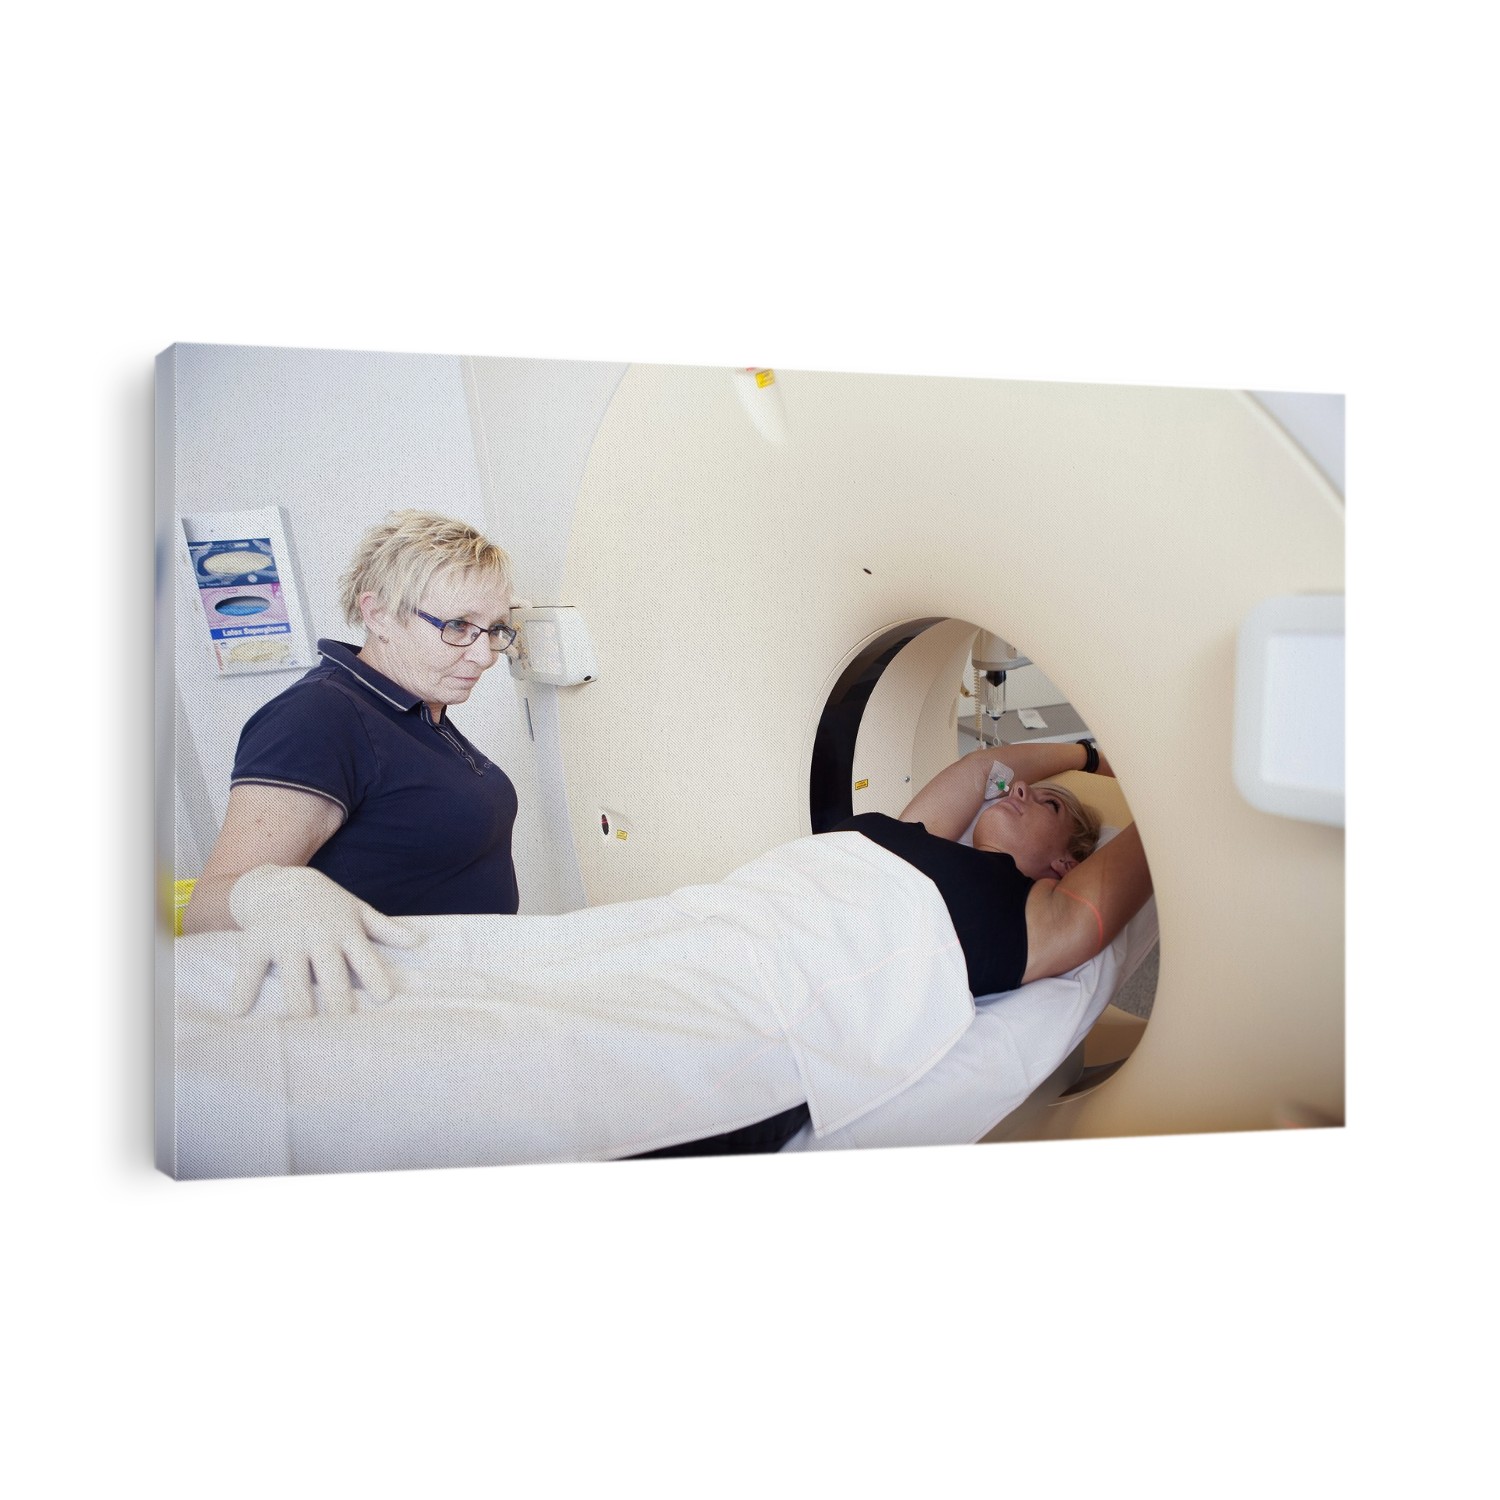 A patient positioned for a CT scan. Also known as CAT (computed axial tomography) scanning, CT (computed tomography) scanning is a diagnostic technique in which X-rays are passed through the body at different angles. A computer then produces cross-sectional images of the tissue being examined. This technique provides clearer and more detailed information about body tissues than X- rays used by themselves.